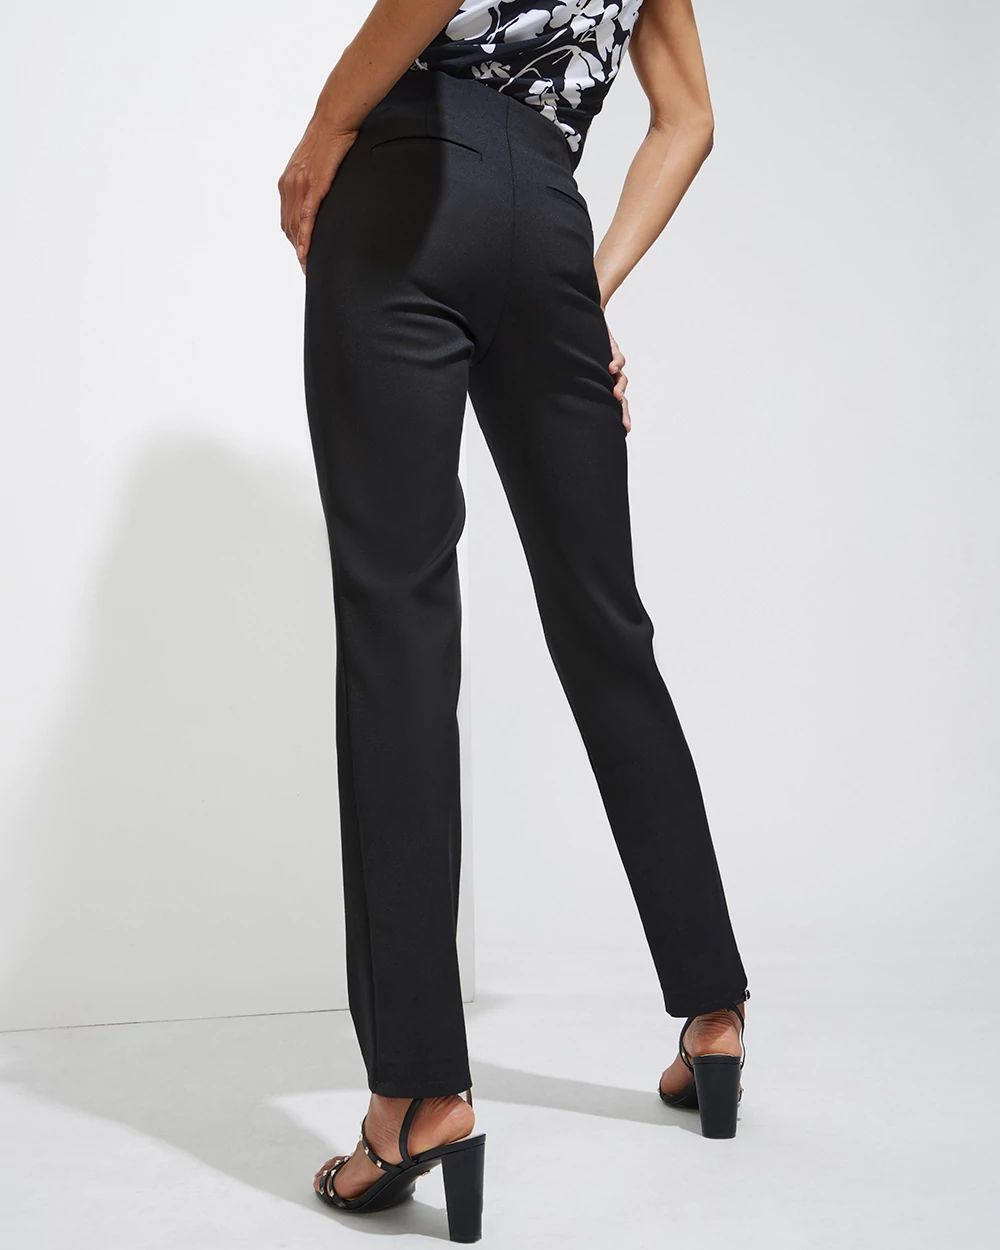 Outlet WHBM The Slim Pant click to view larger image.